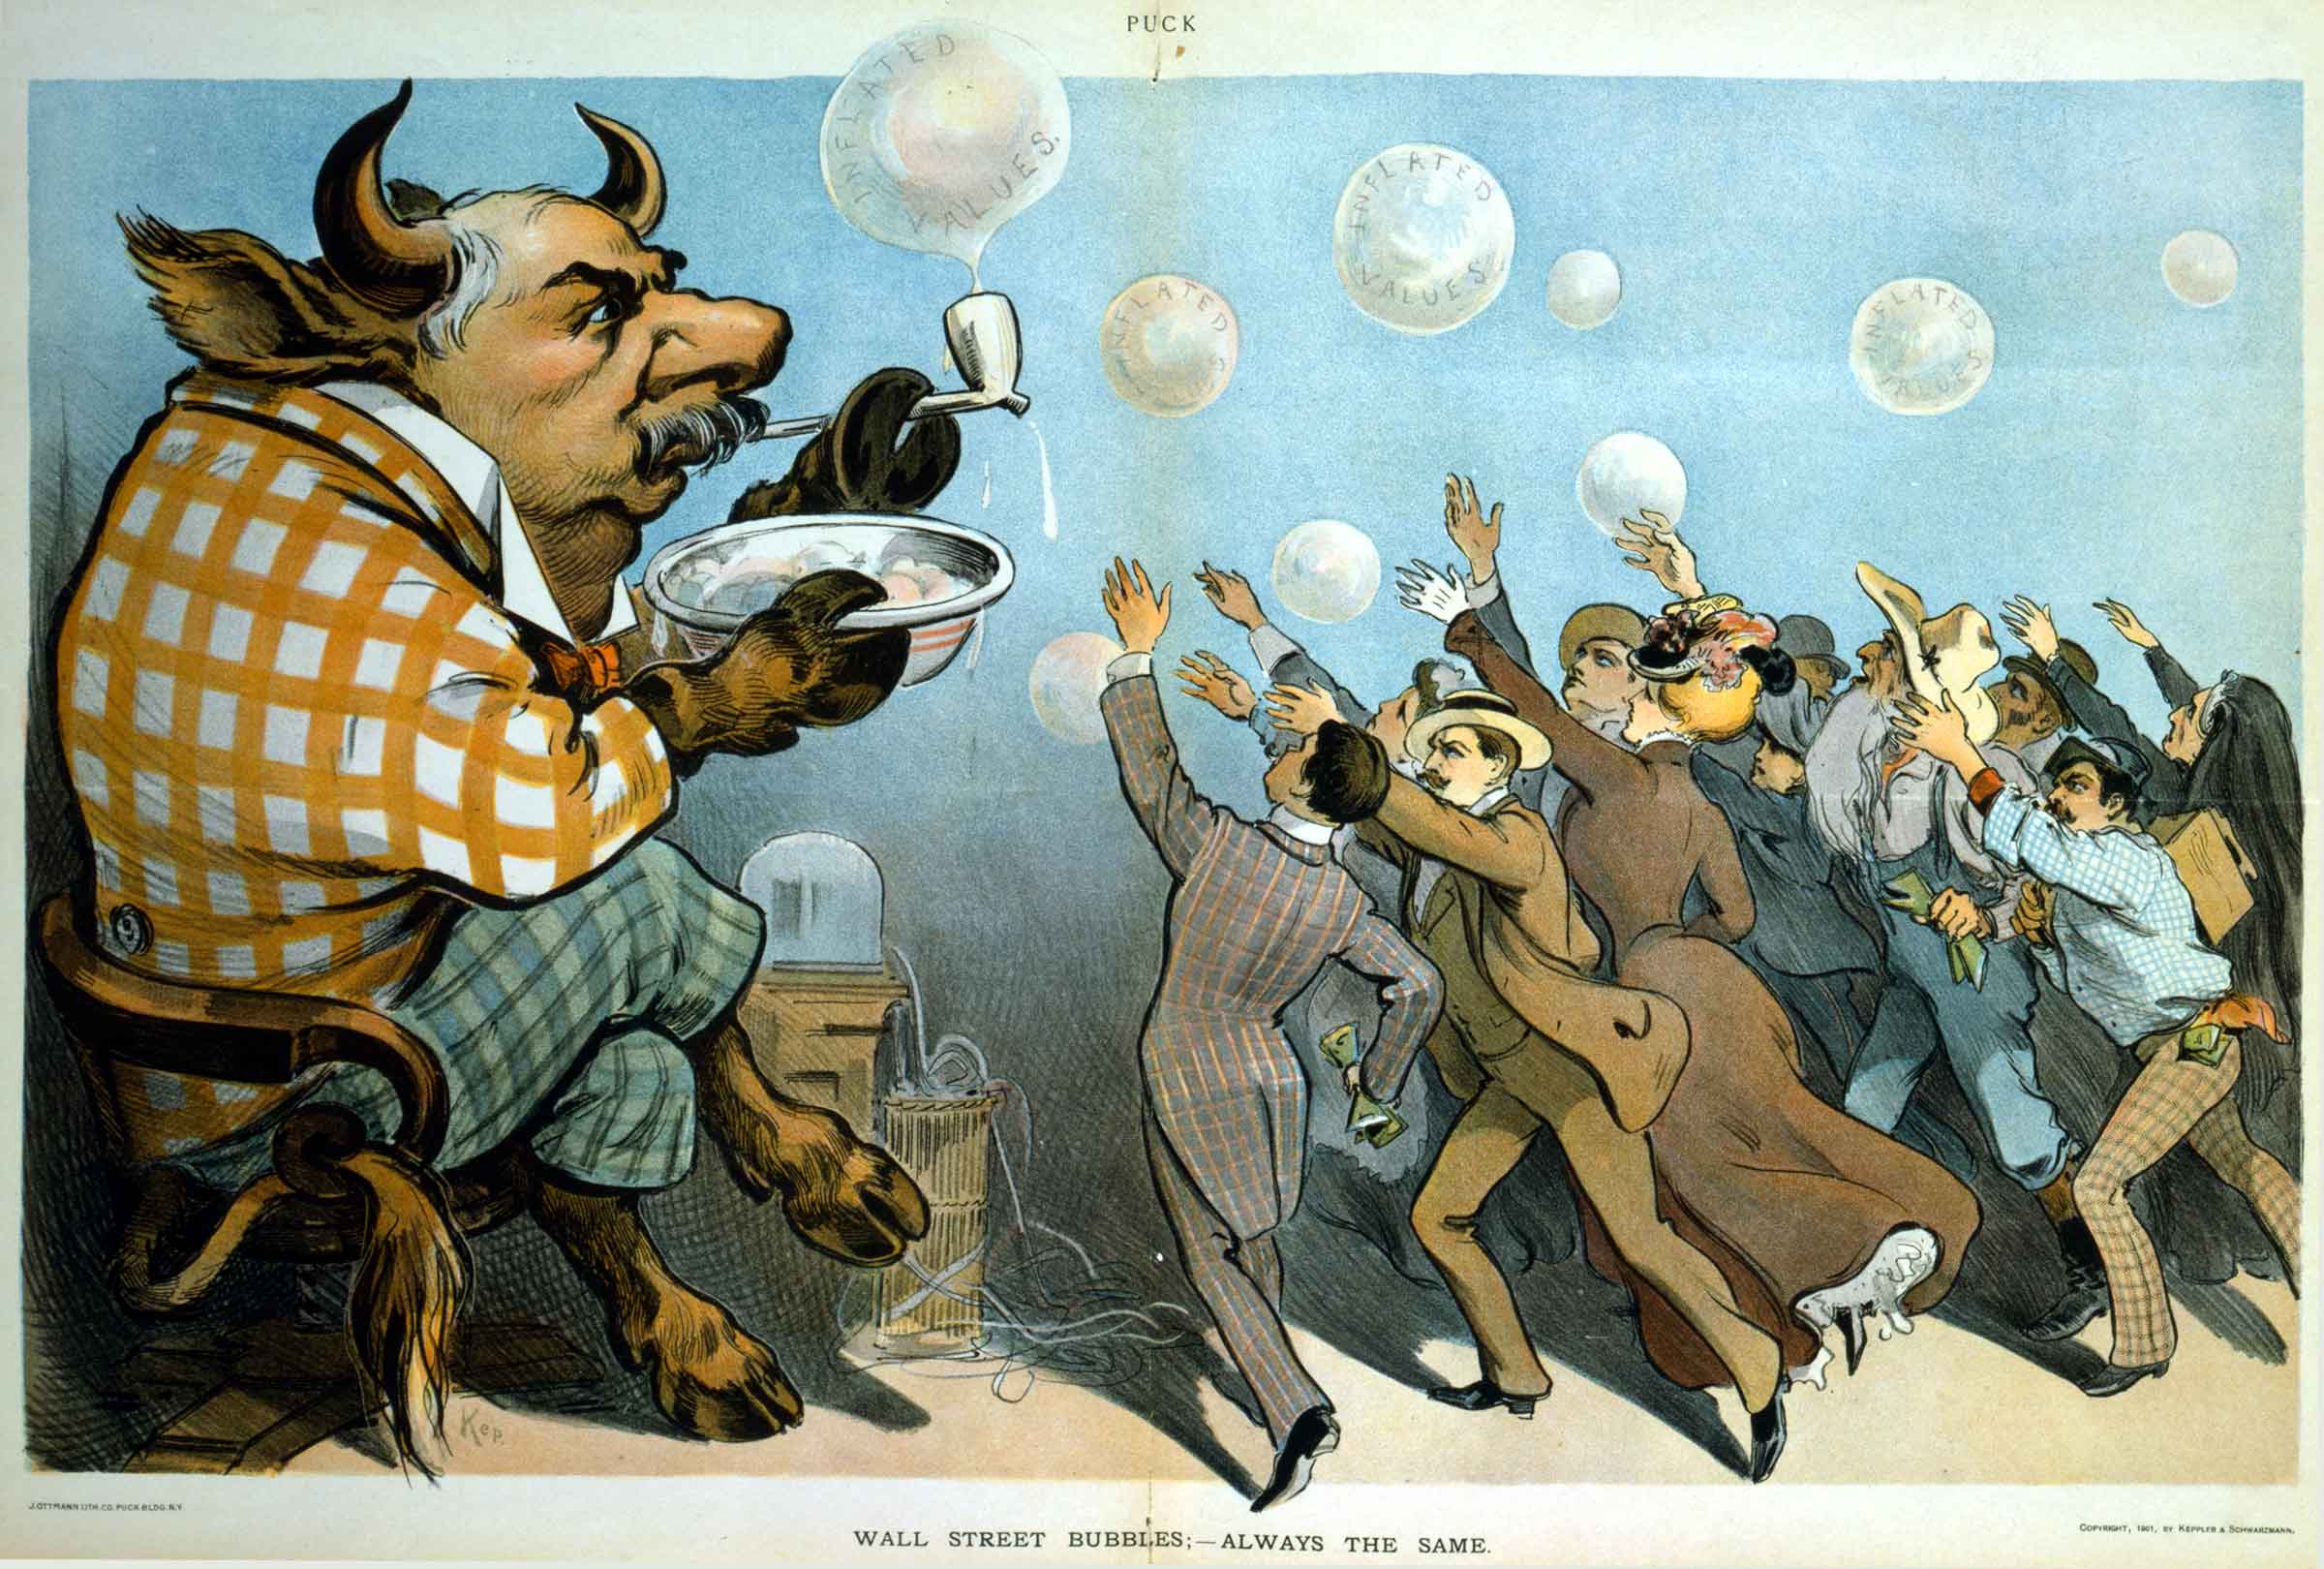 Wall Street Bubbles Always the Same - PUCK 1901 Public Domain